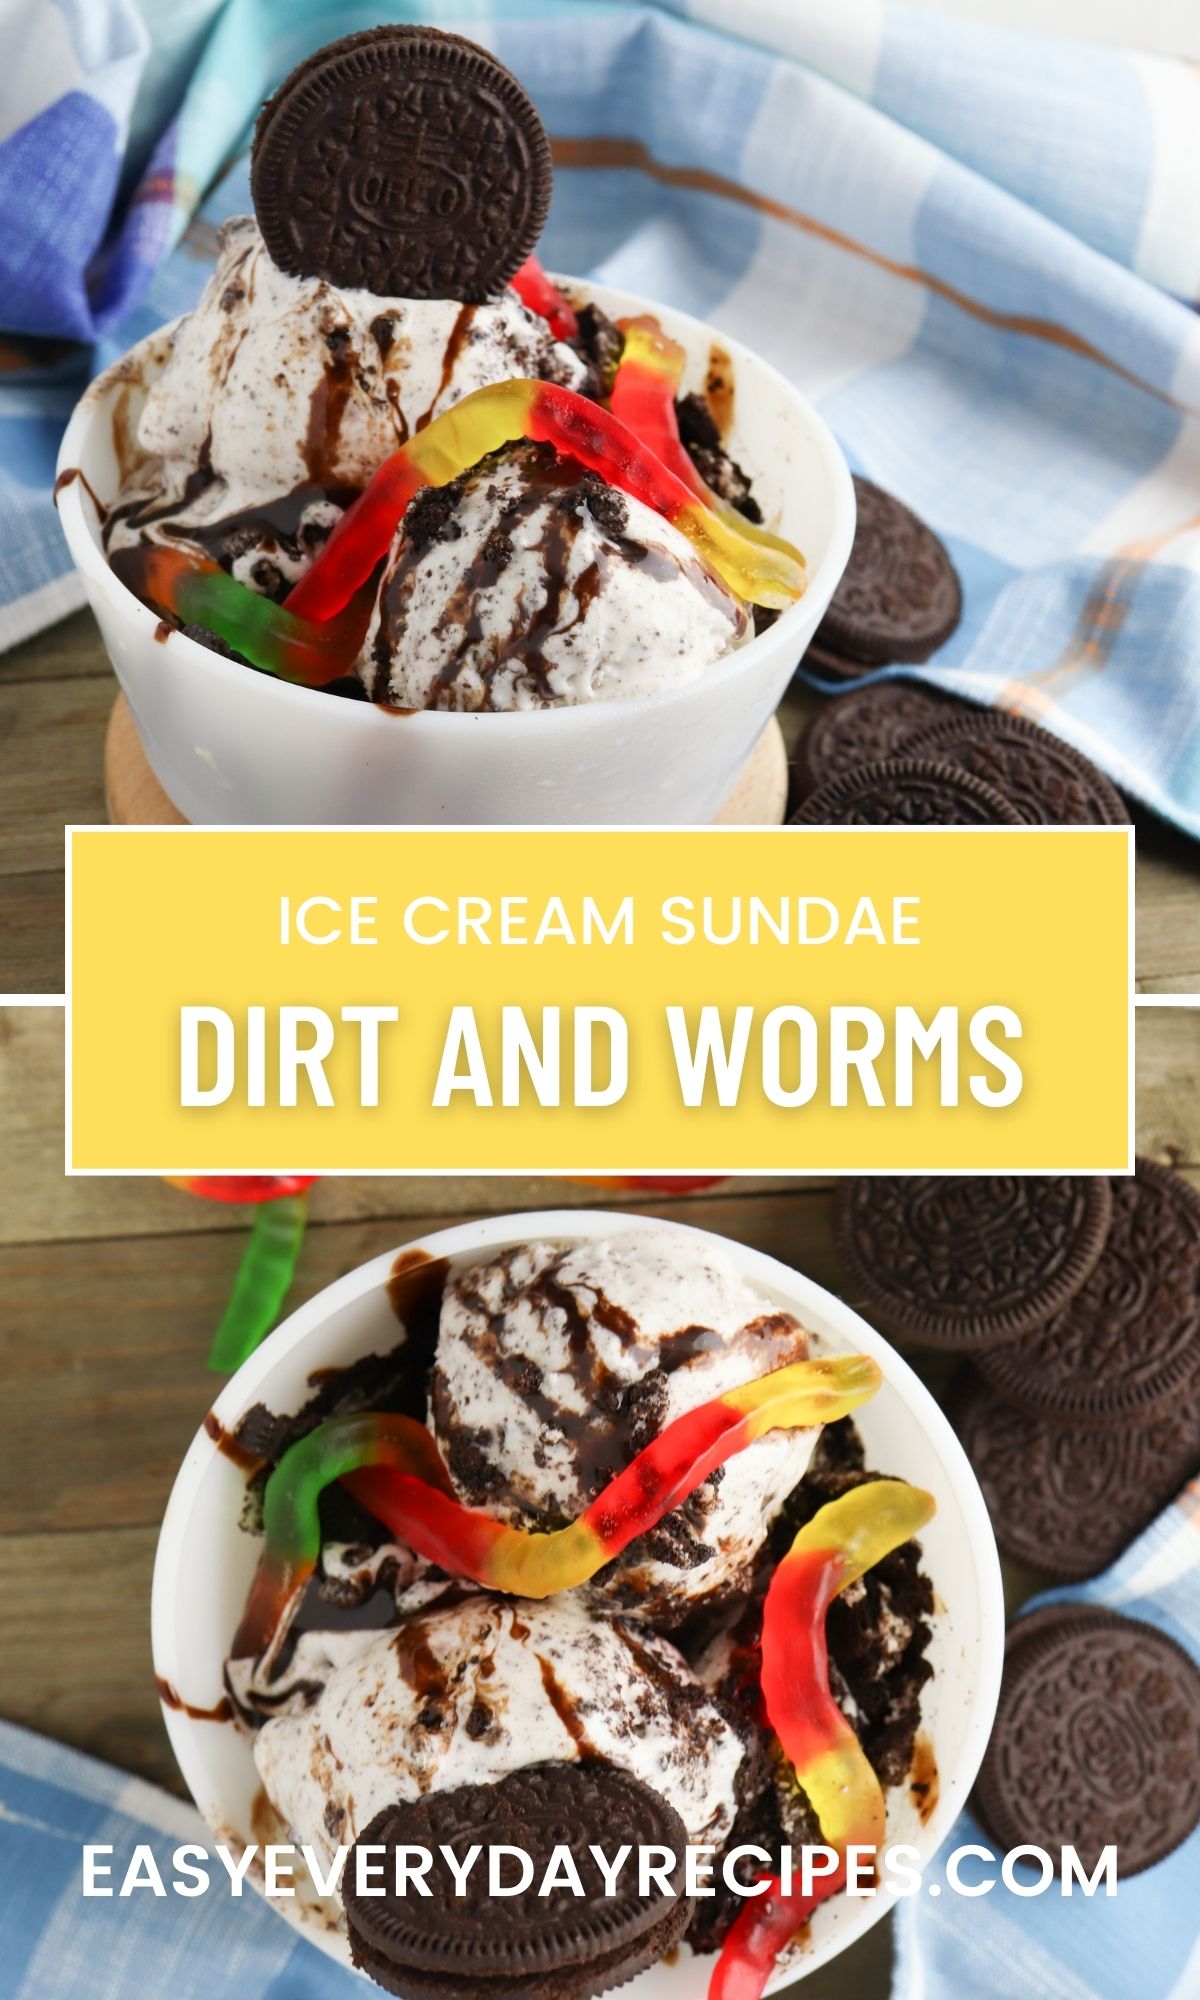 Ice cream sundae with dirt and worms.